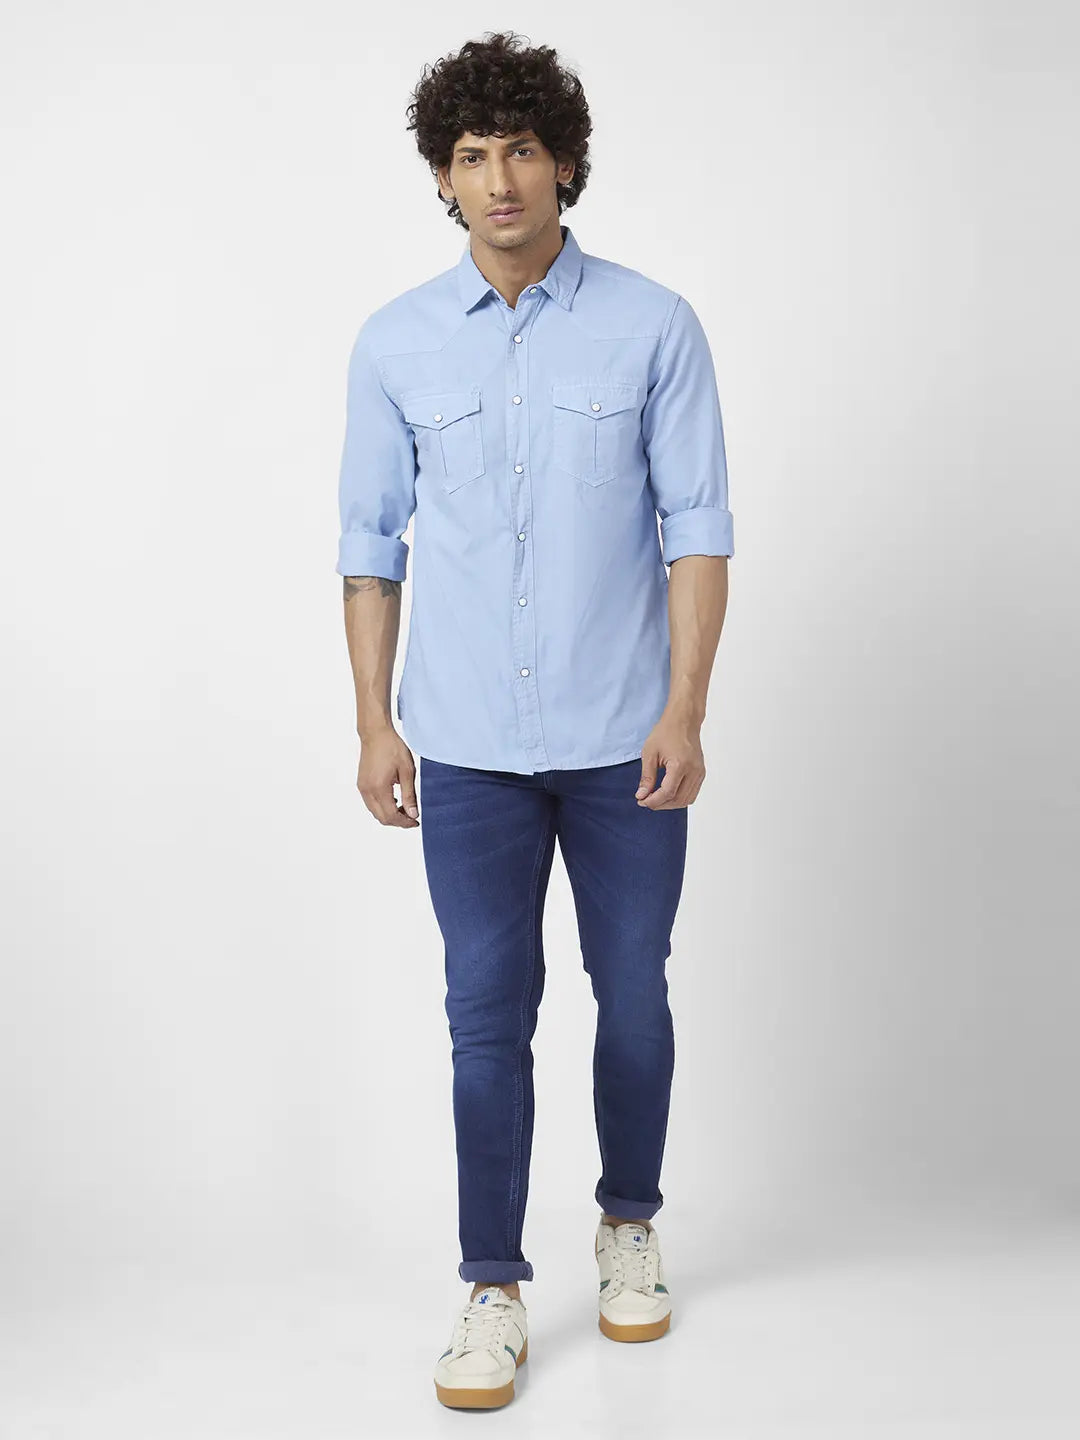 How A Denim Shirt Can Completely Transform Your Style Game